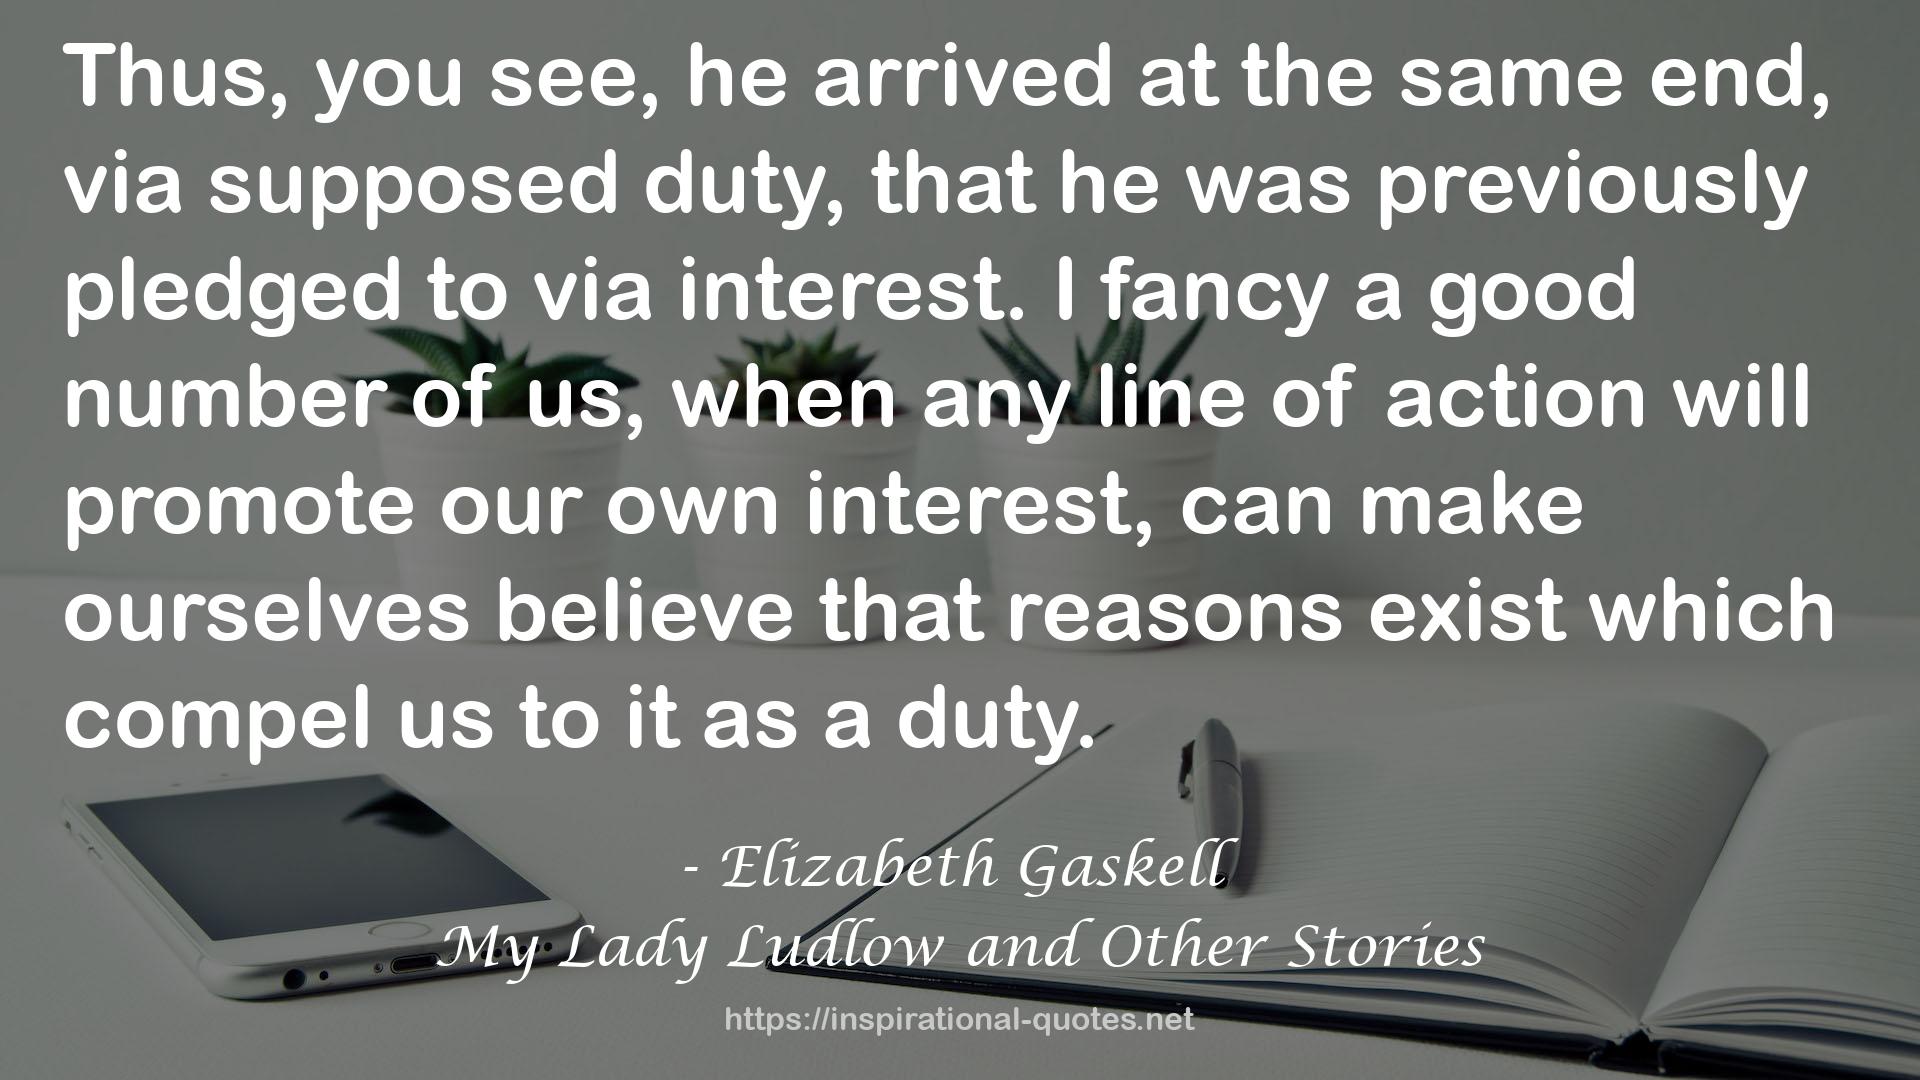 My Lady Ludlow and Other Stories QUOTES